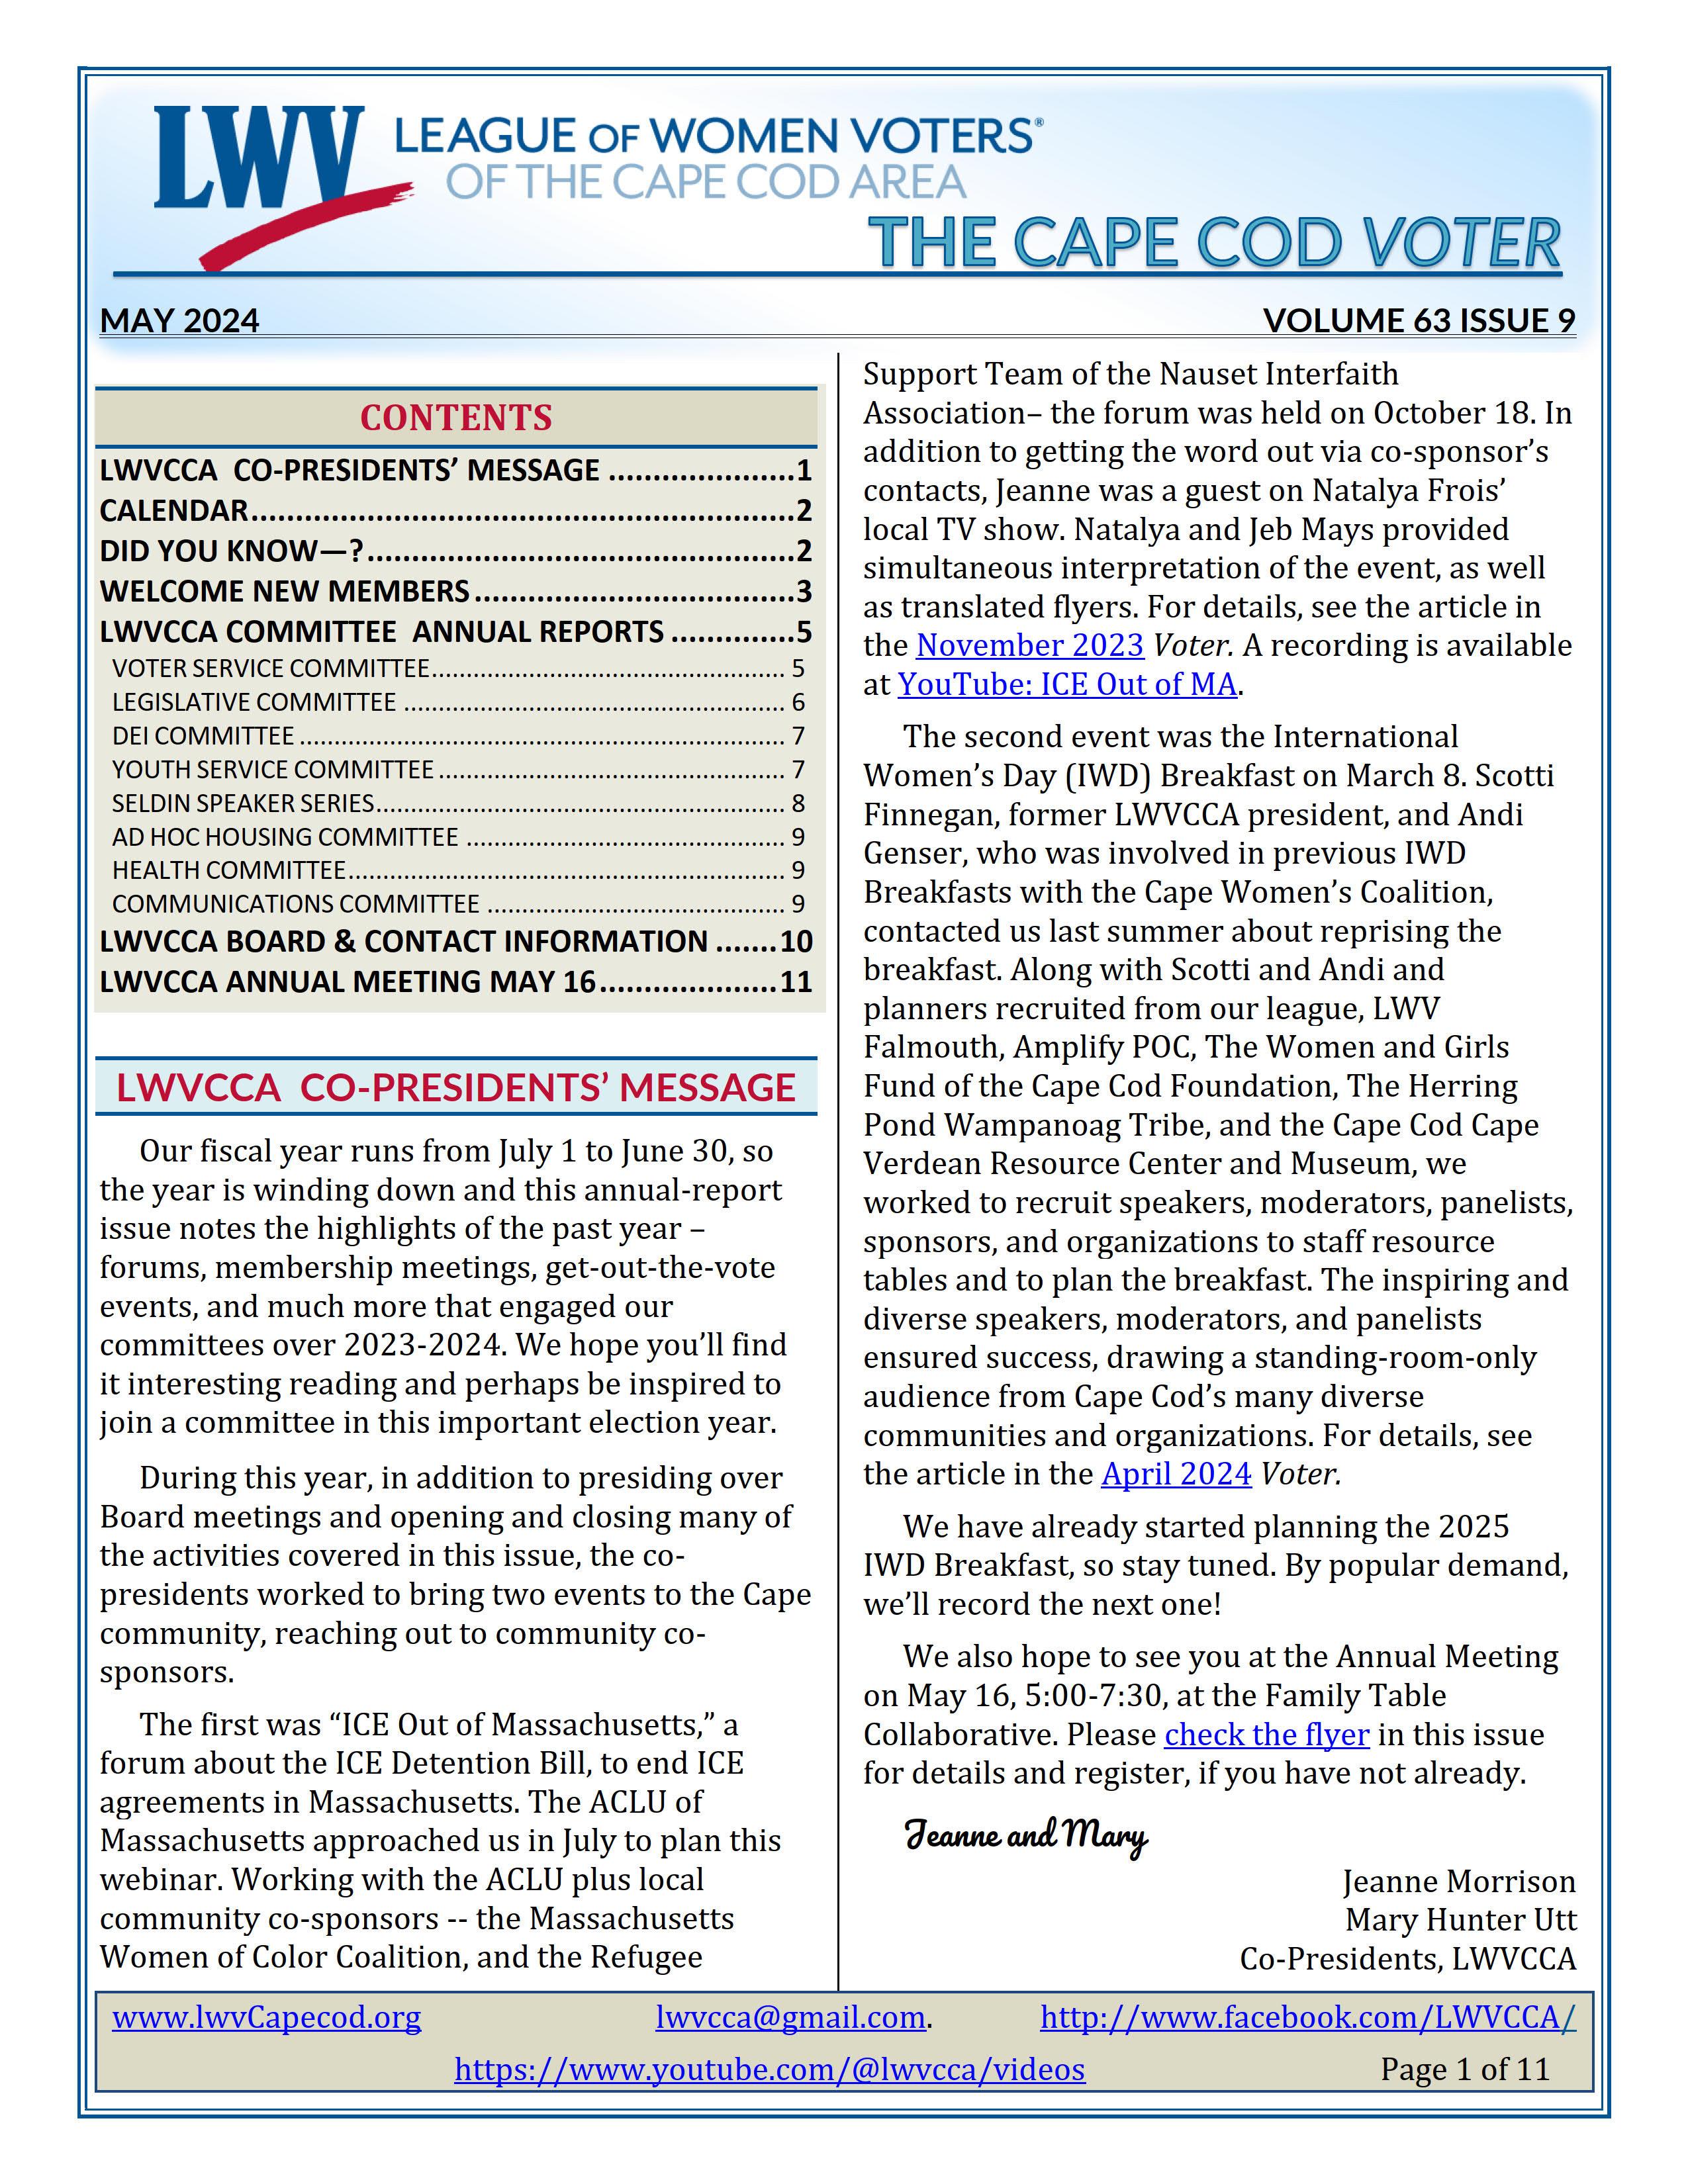 First page of Cape Cod VOTER Vol 63 Issue 9 May 2024